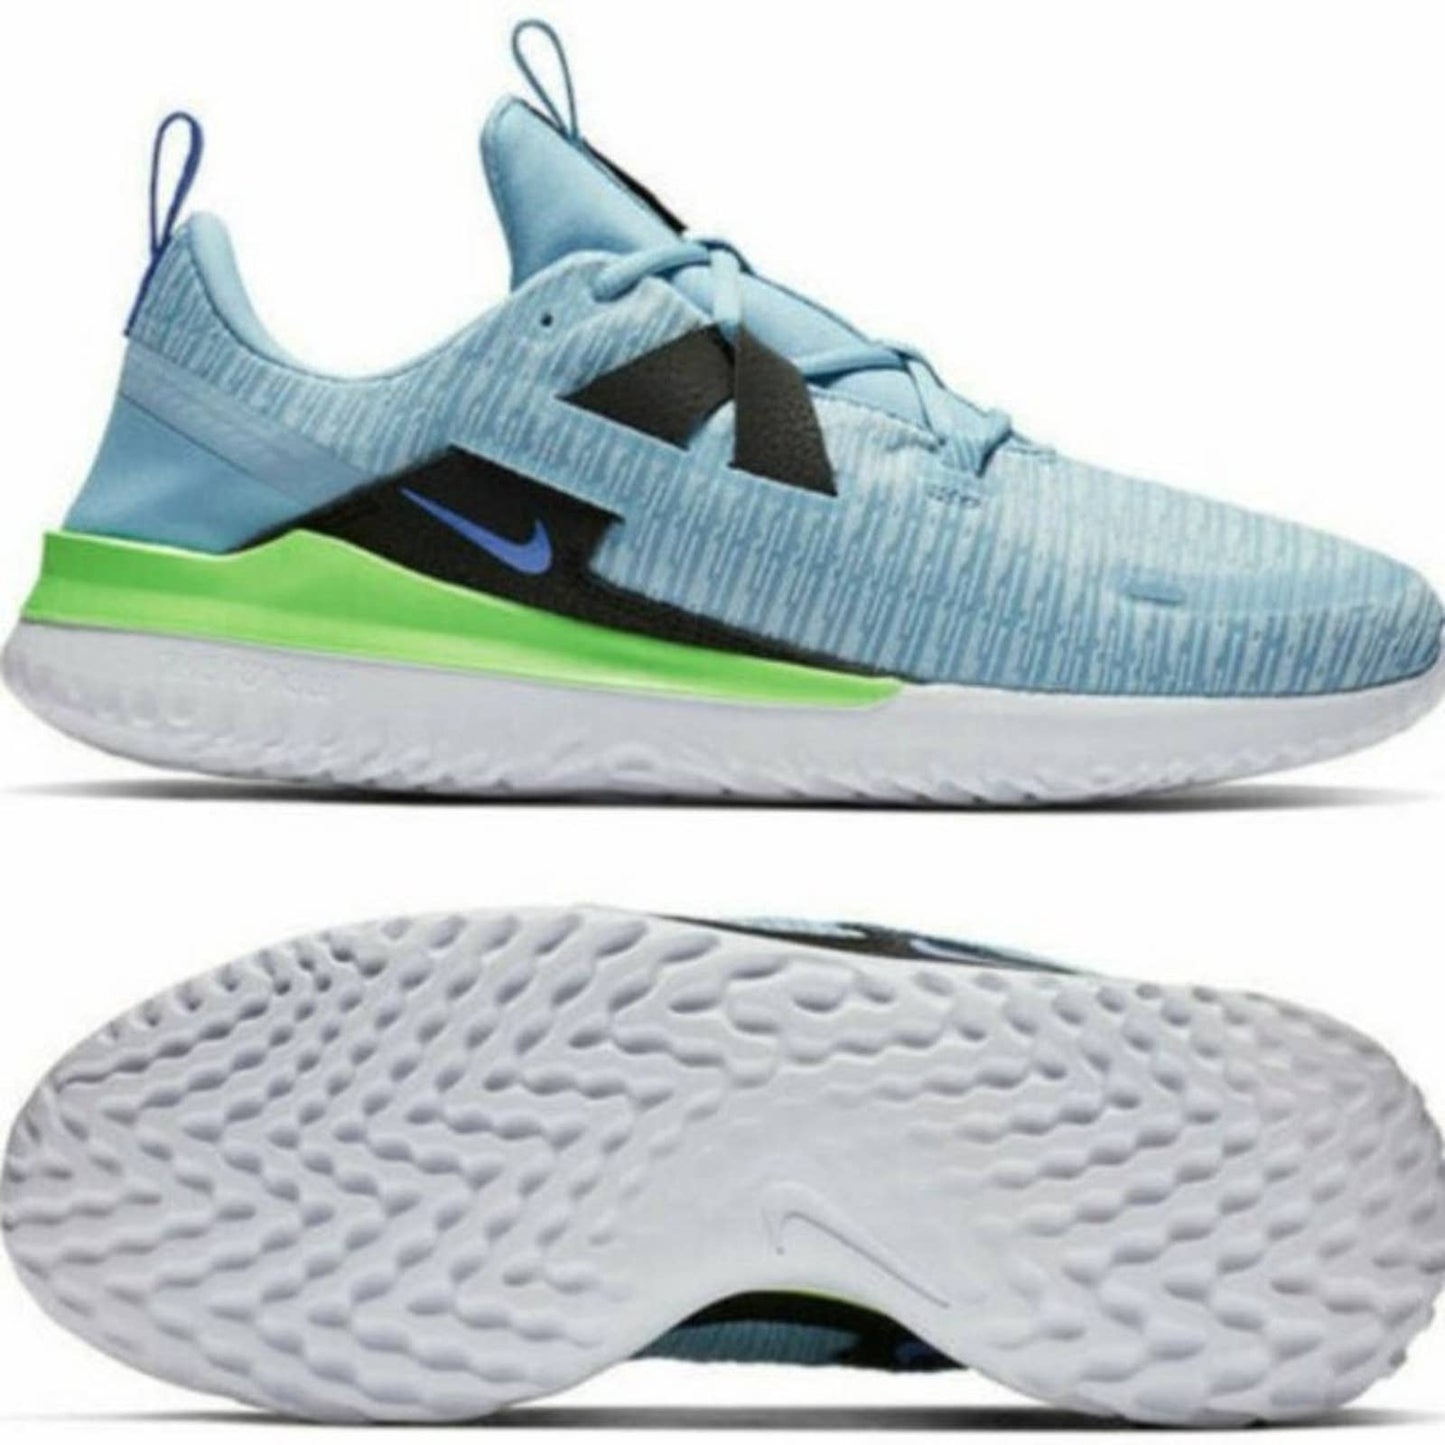 Nike Renew Arena Hydrogen Running Shoes - 9/10.5